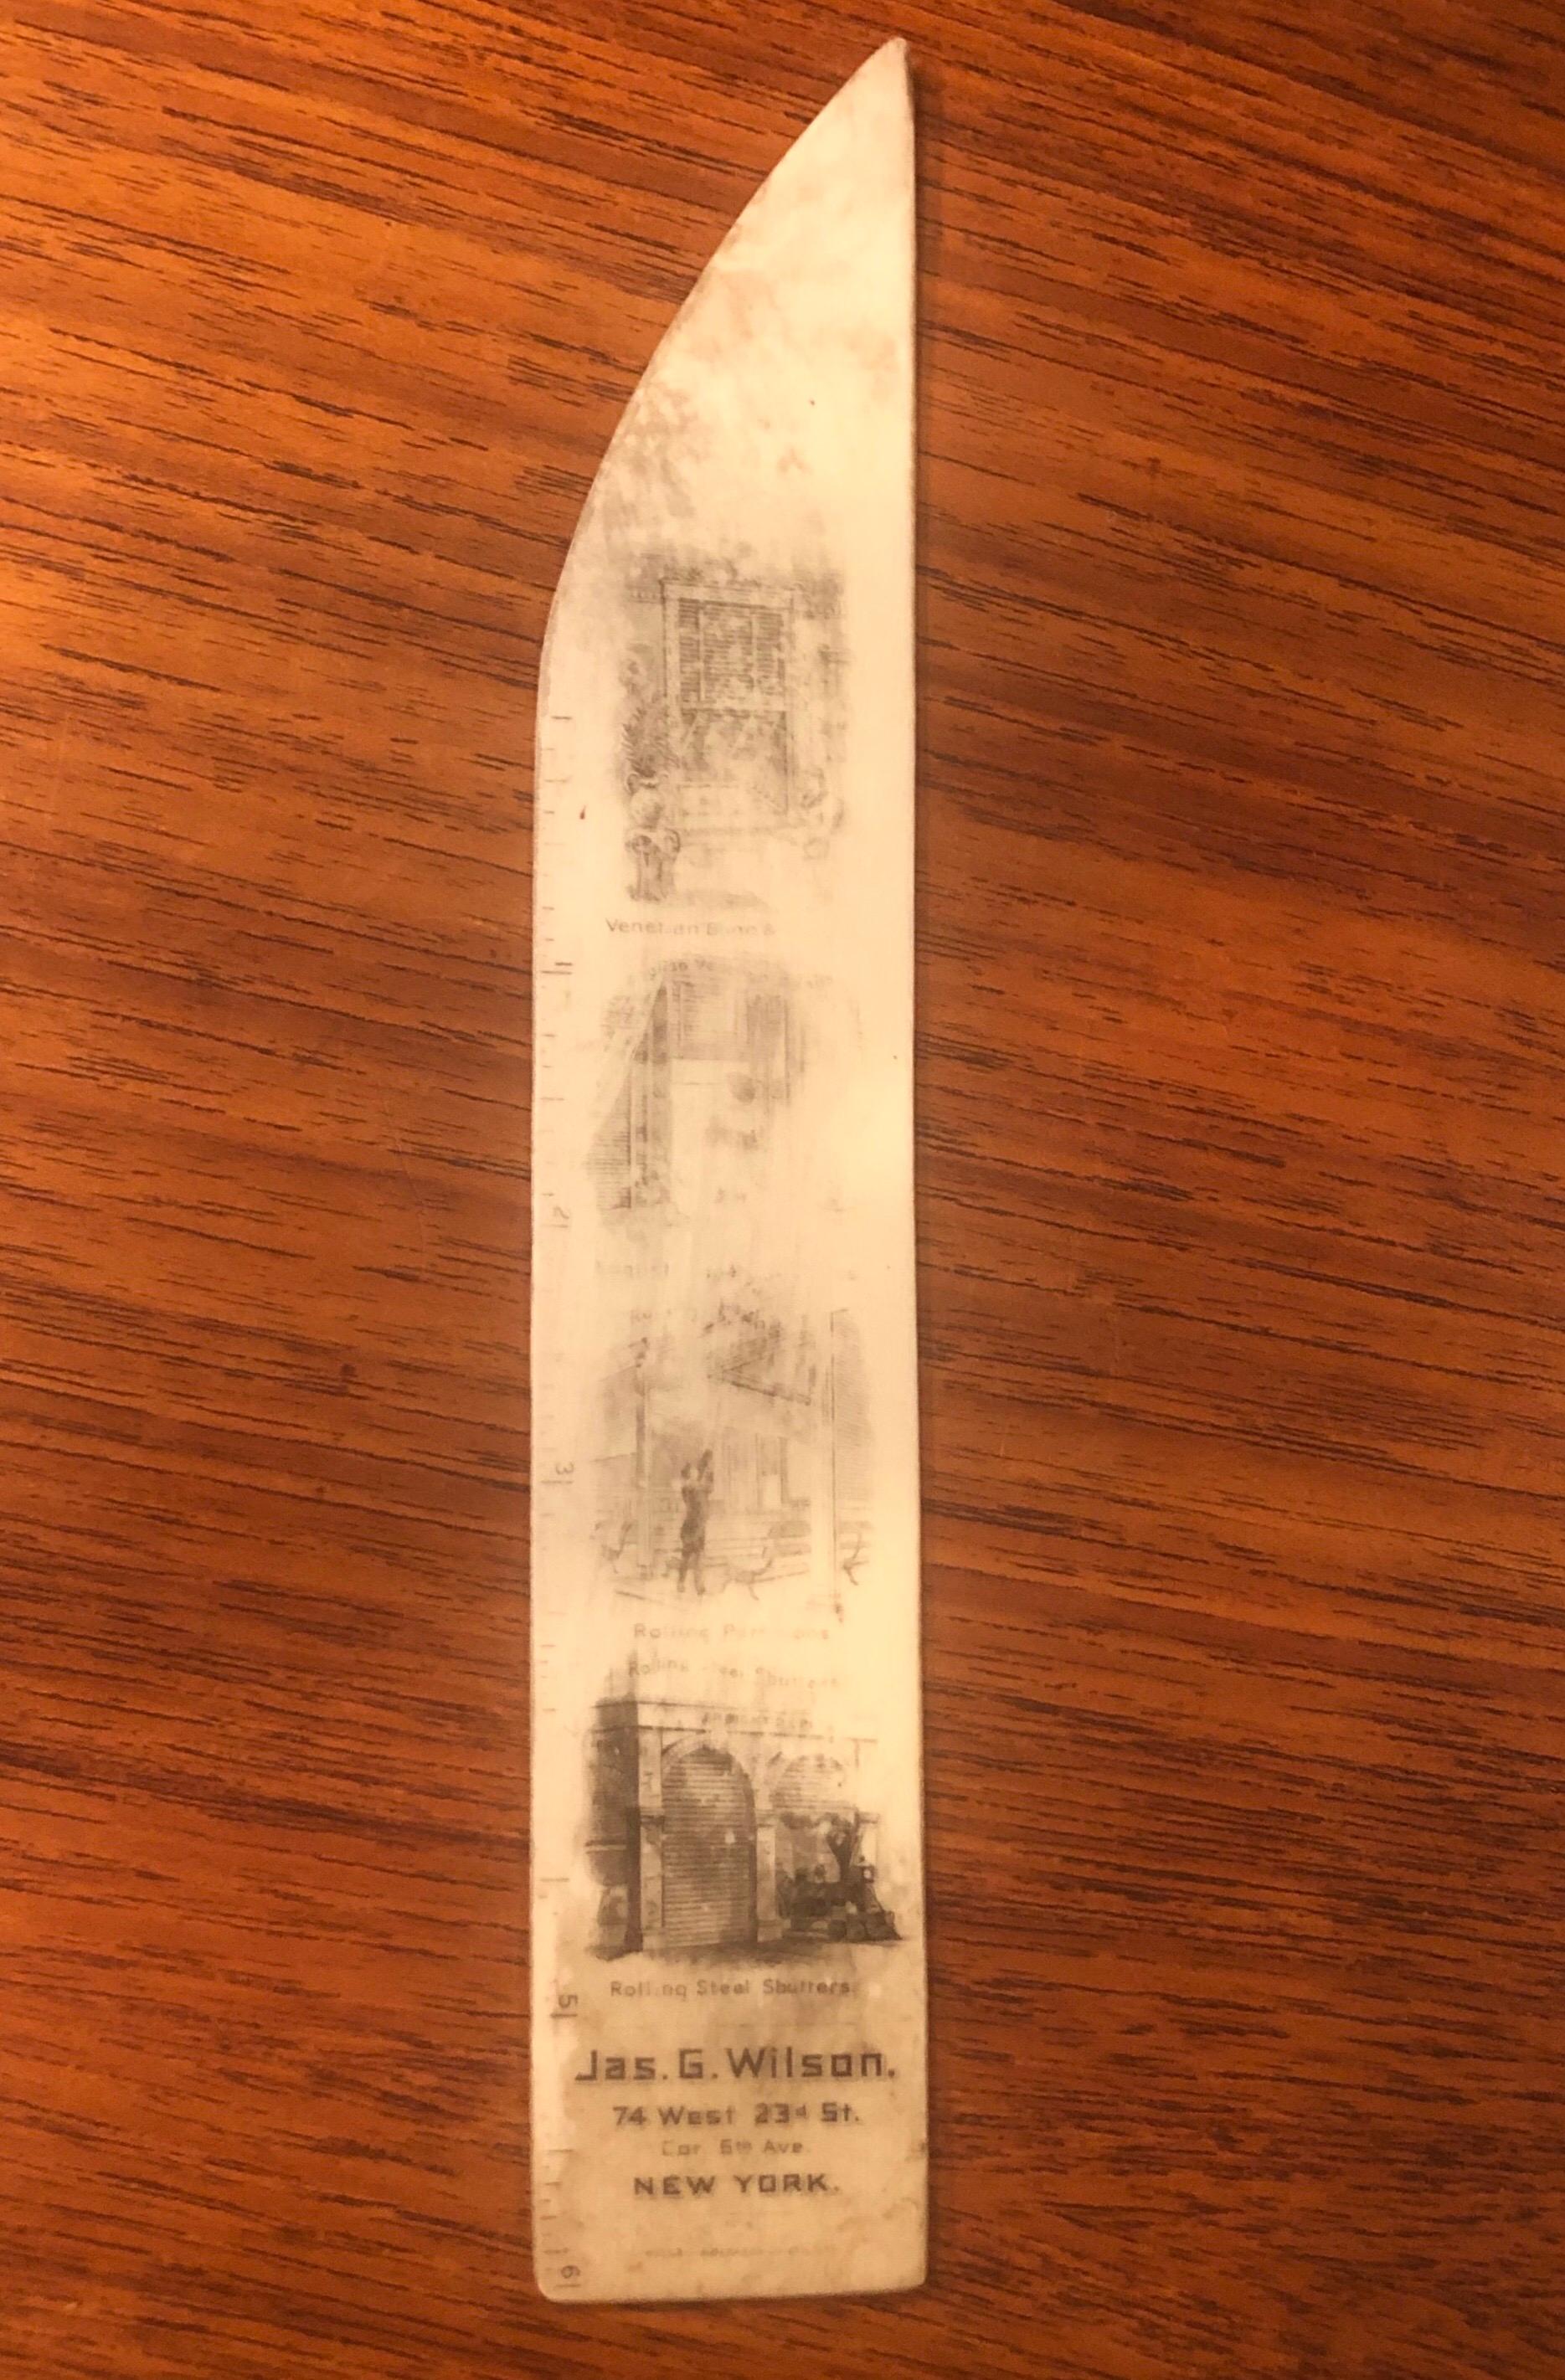 An antique book mark / ruler advertising Jas. G. Wilson's blinds and shutter shop at 74 West 23rd Street in New York City, circa 1910s. The graphics are a black transfer of various products the shop sells on a thin slice of bone with a ruler on one